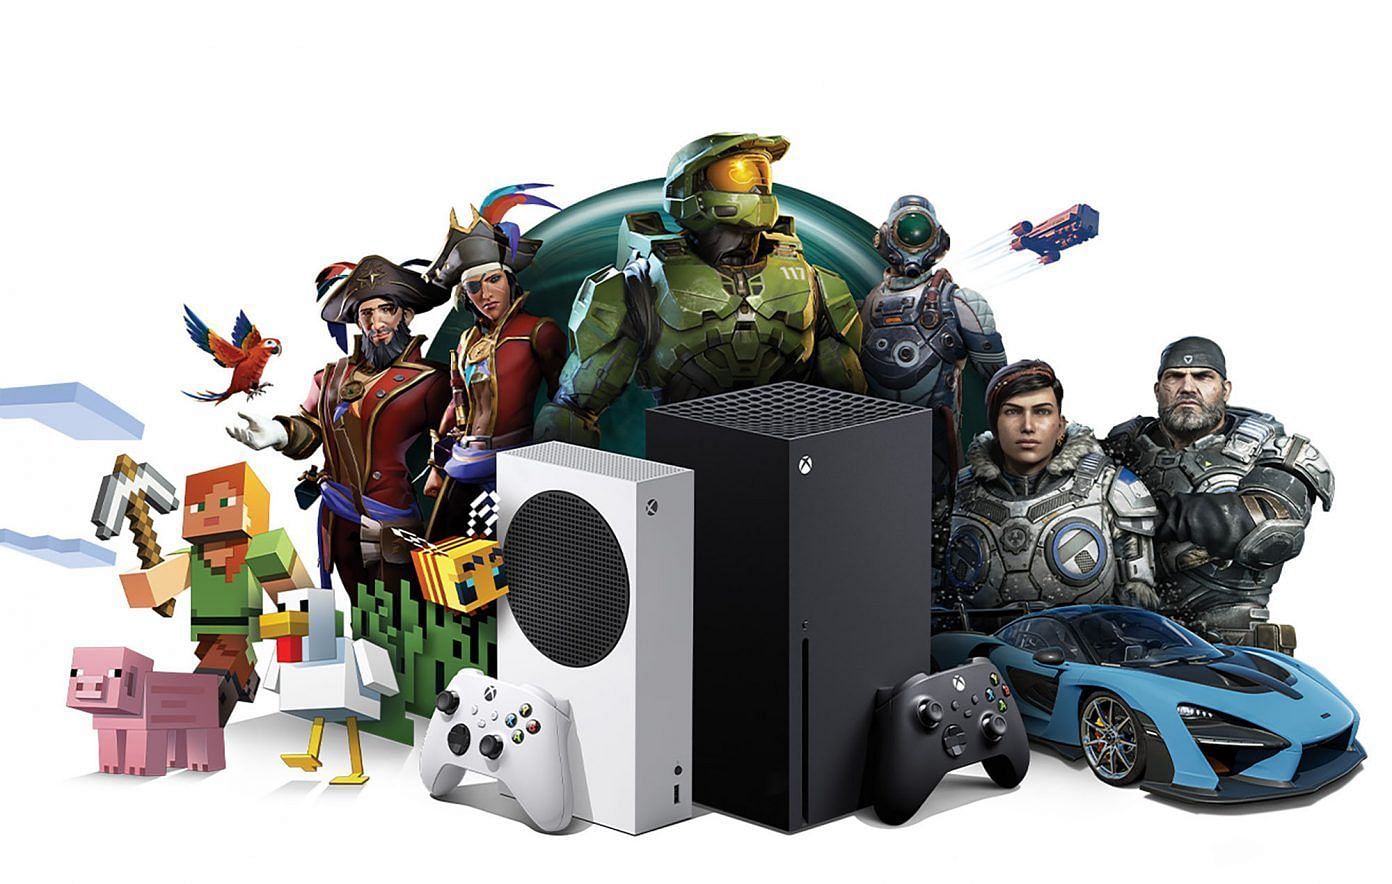 Game Pass offers games across many genres to enjoy (Image from Microsoft)